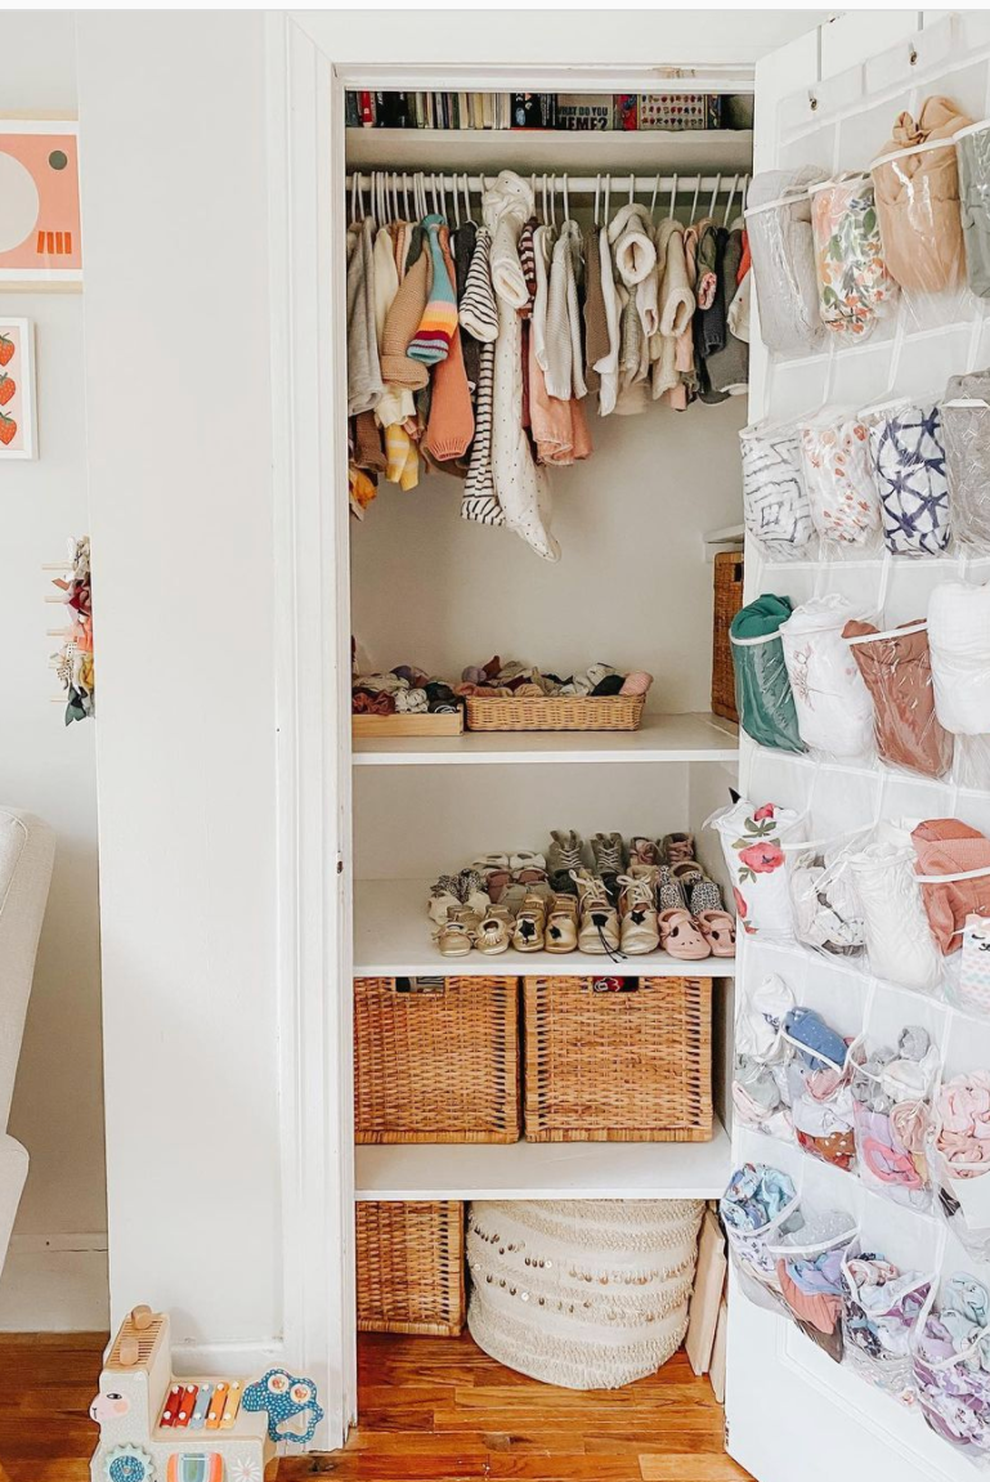 15 ideas to save space for small wardrobe - 7